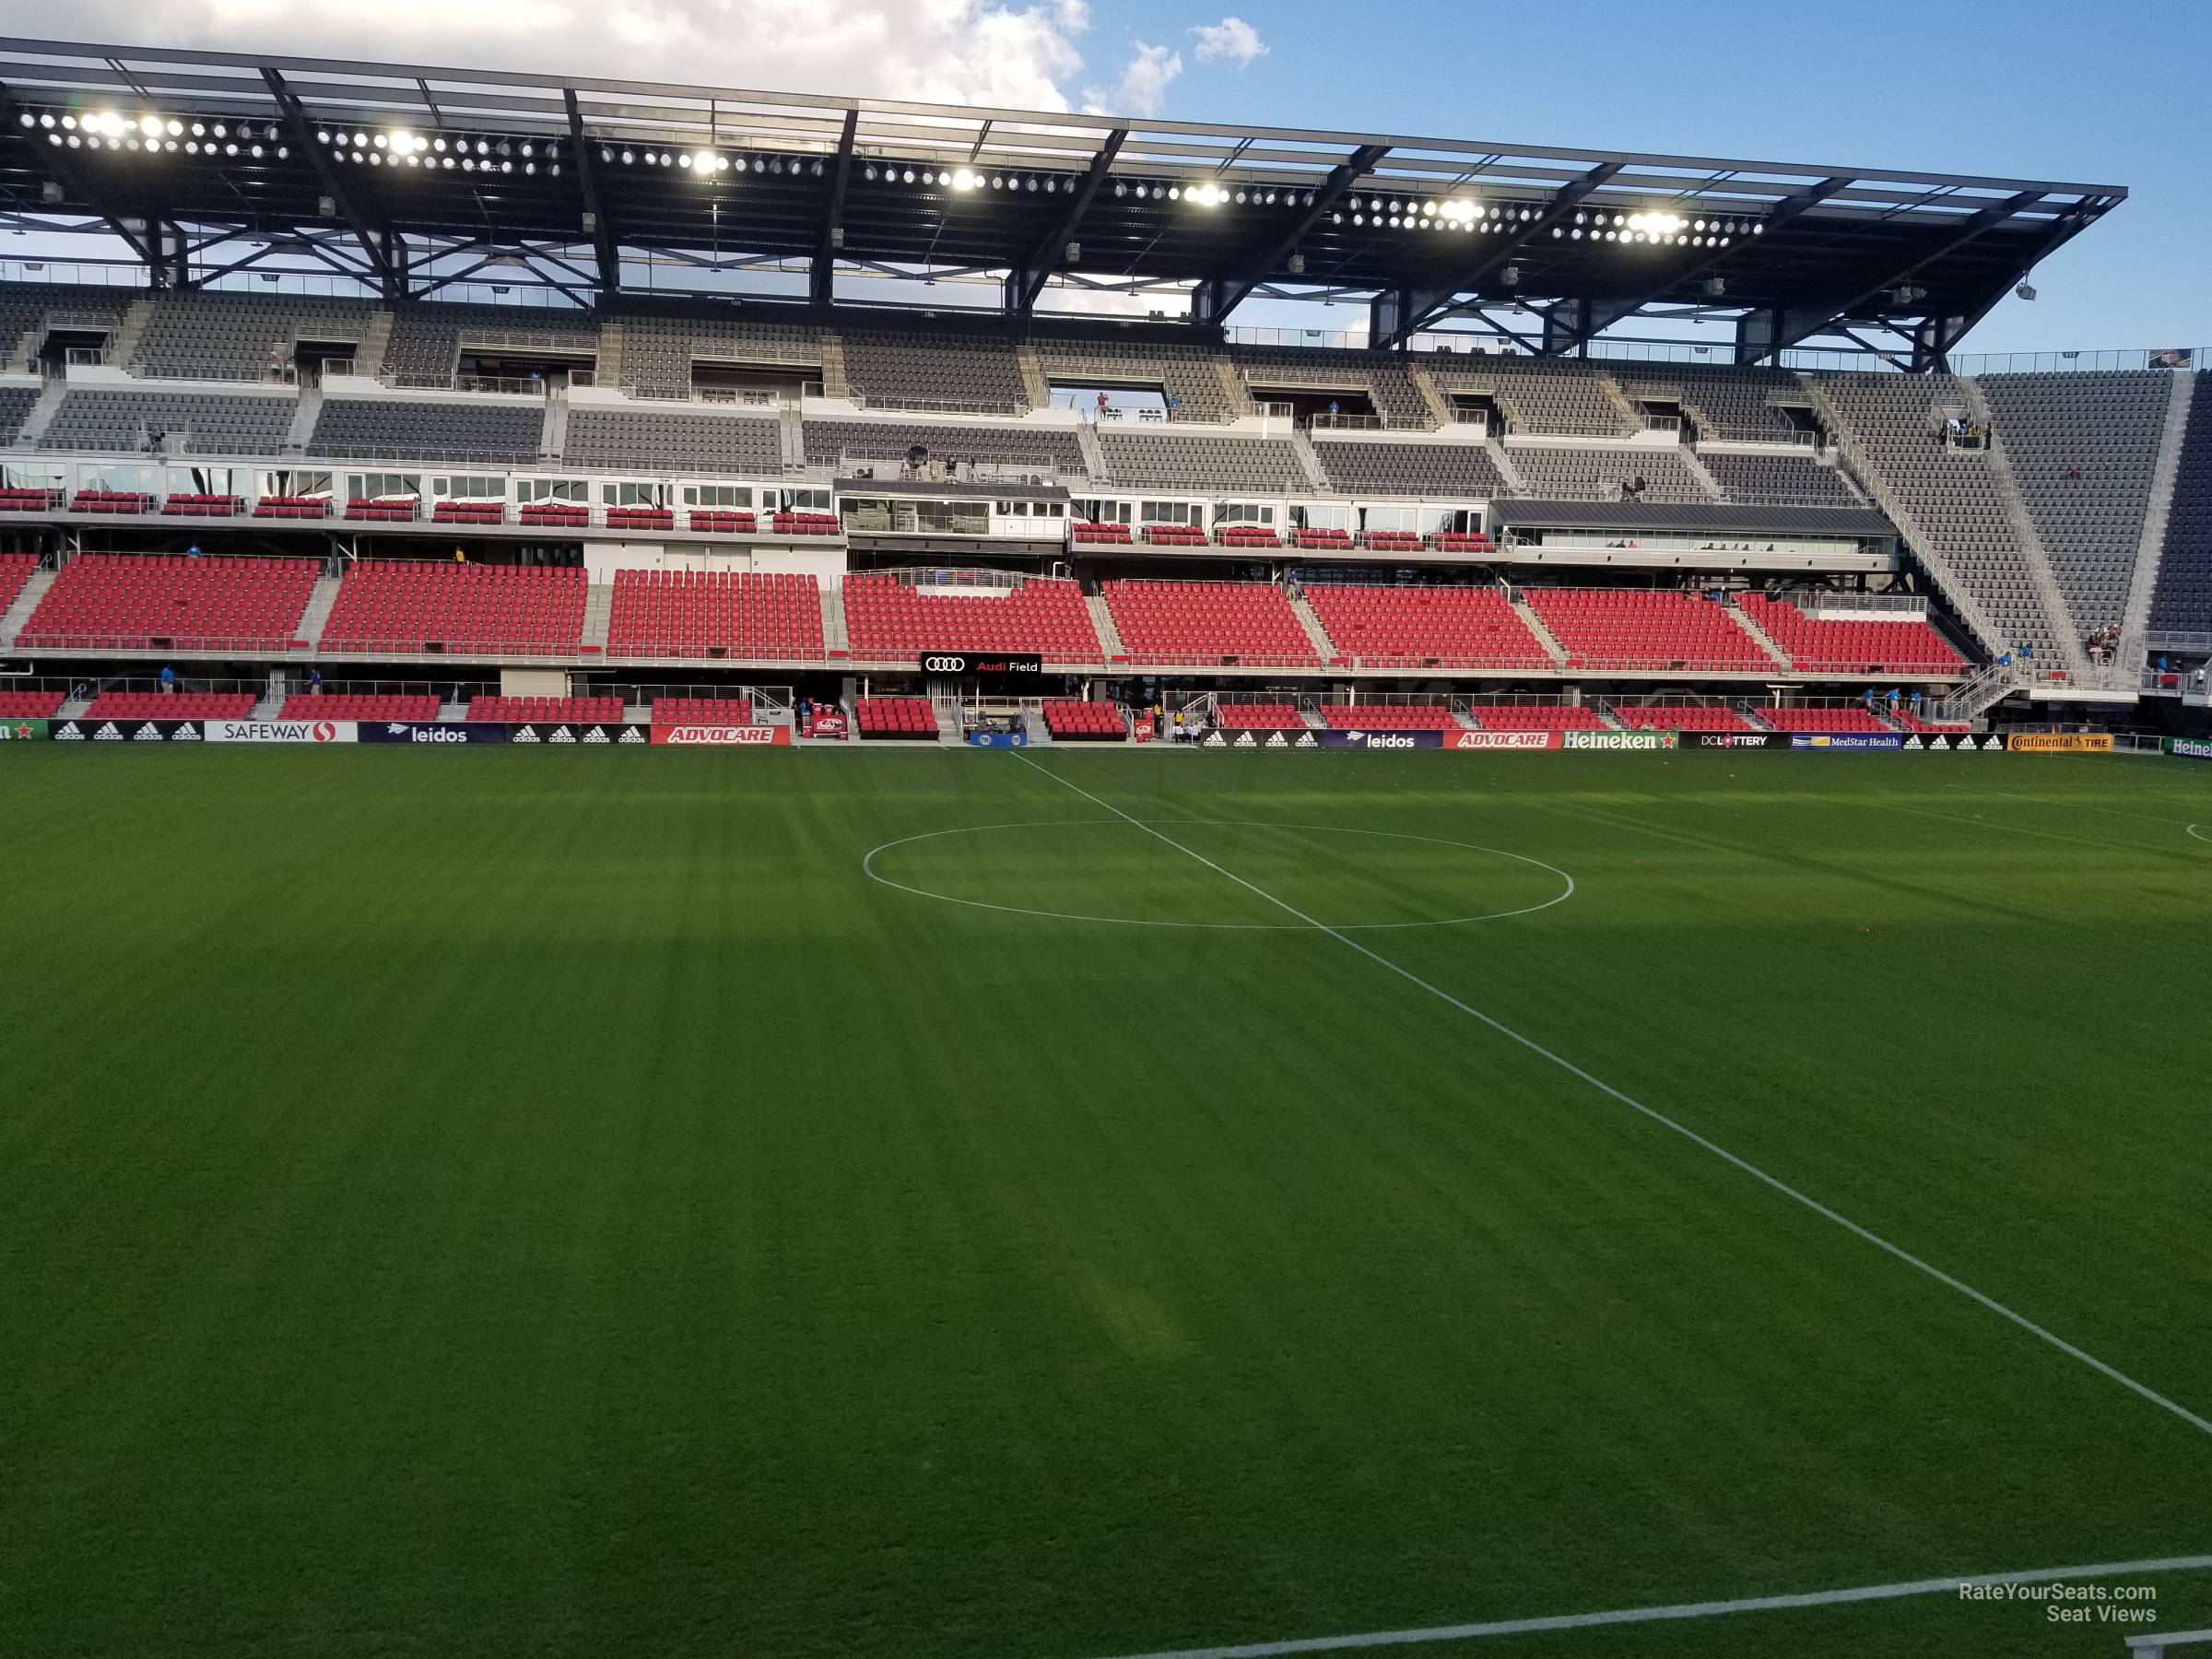 section 128, row 8 seat view  - audi field